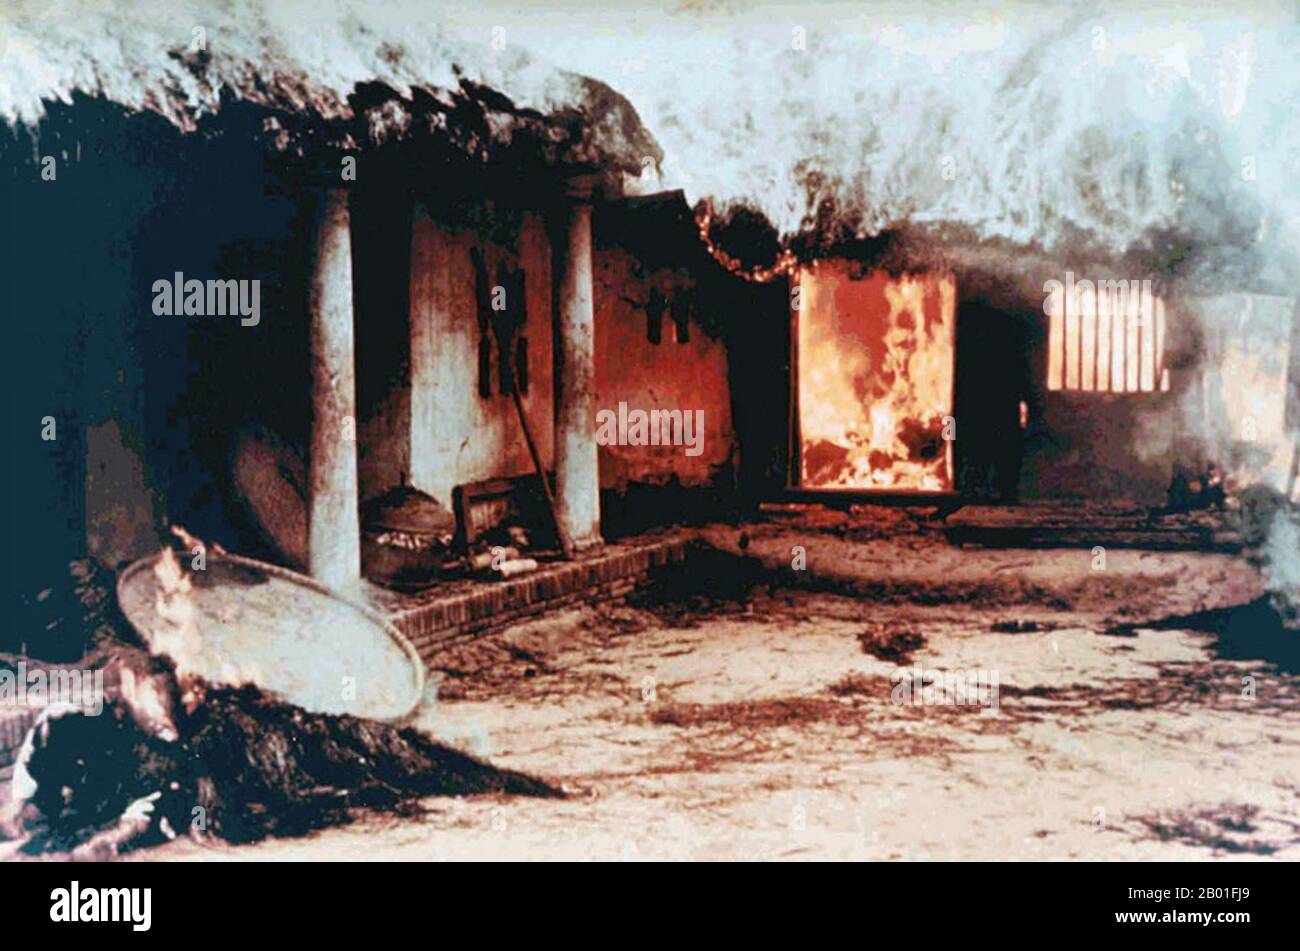 Vietnam: Unidentified bodies near burning house, My Lai, March 16, 1968. Photo by Sgt. Ronald L. Haeberle.  The My Lai Massacre was the Vietnam War mass murder of 347–504 unarmed civilians in South Vietnam on March 16, 1968, by United States Army soldiers of 'Charlie' Company of 1st Battalion, 20th Infantry Regiment, 11th Brigade of the Americal Division.  Most of the victims were women, children (including babies), and elderly people. Many were raped, beaten, and tortured, and some of the bodies were later found to be mutilated. Stock Photo